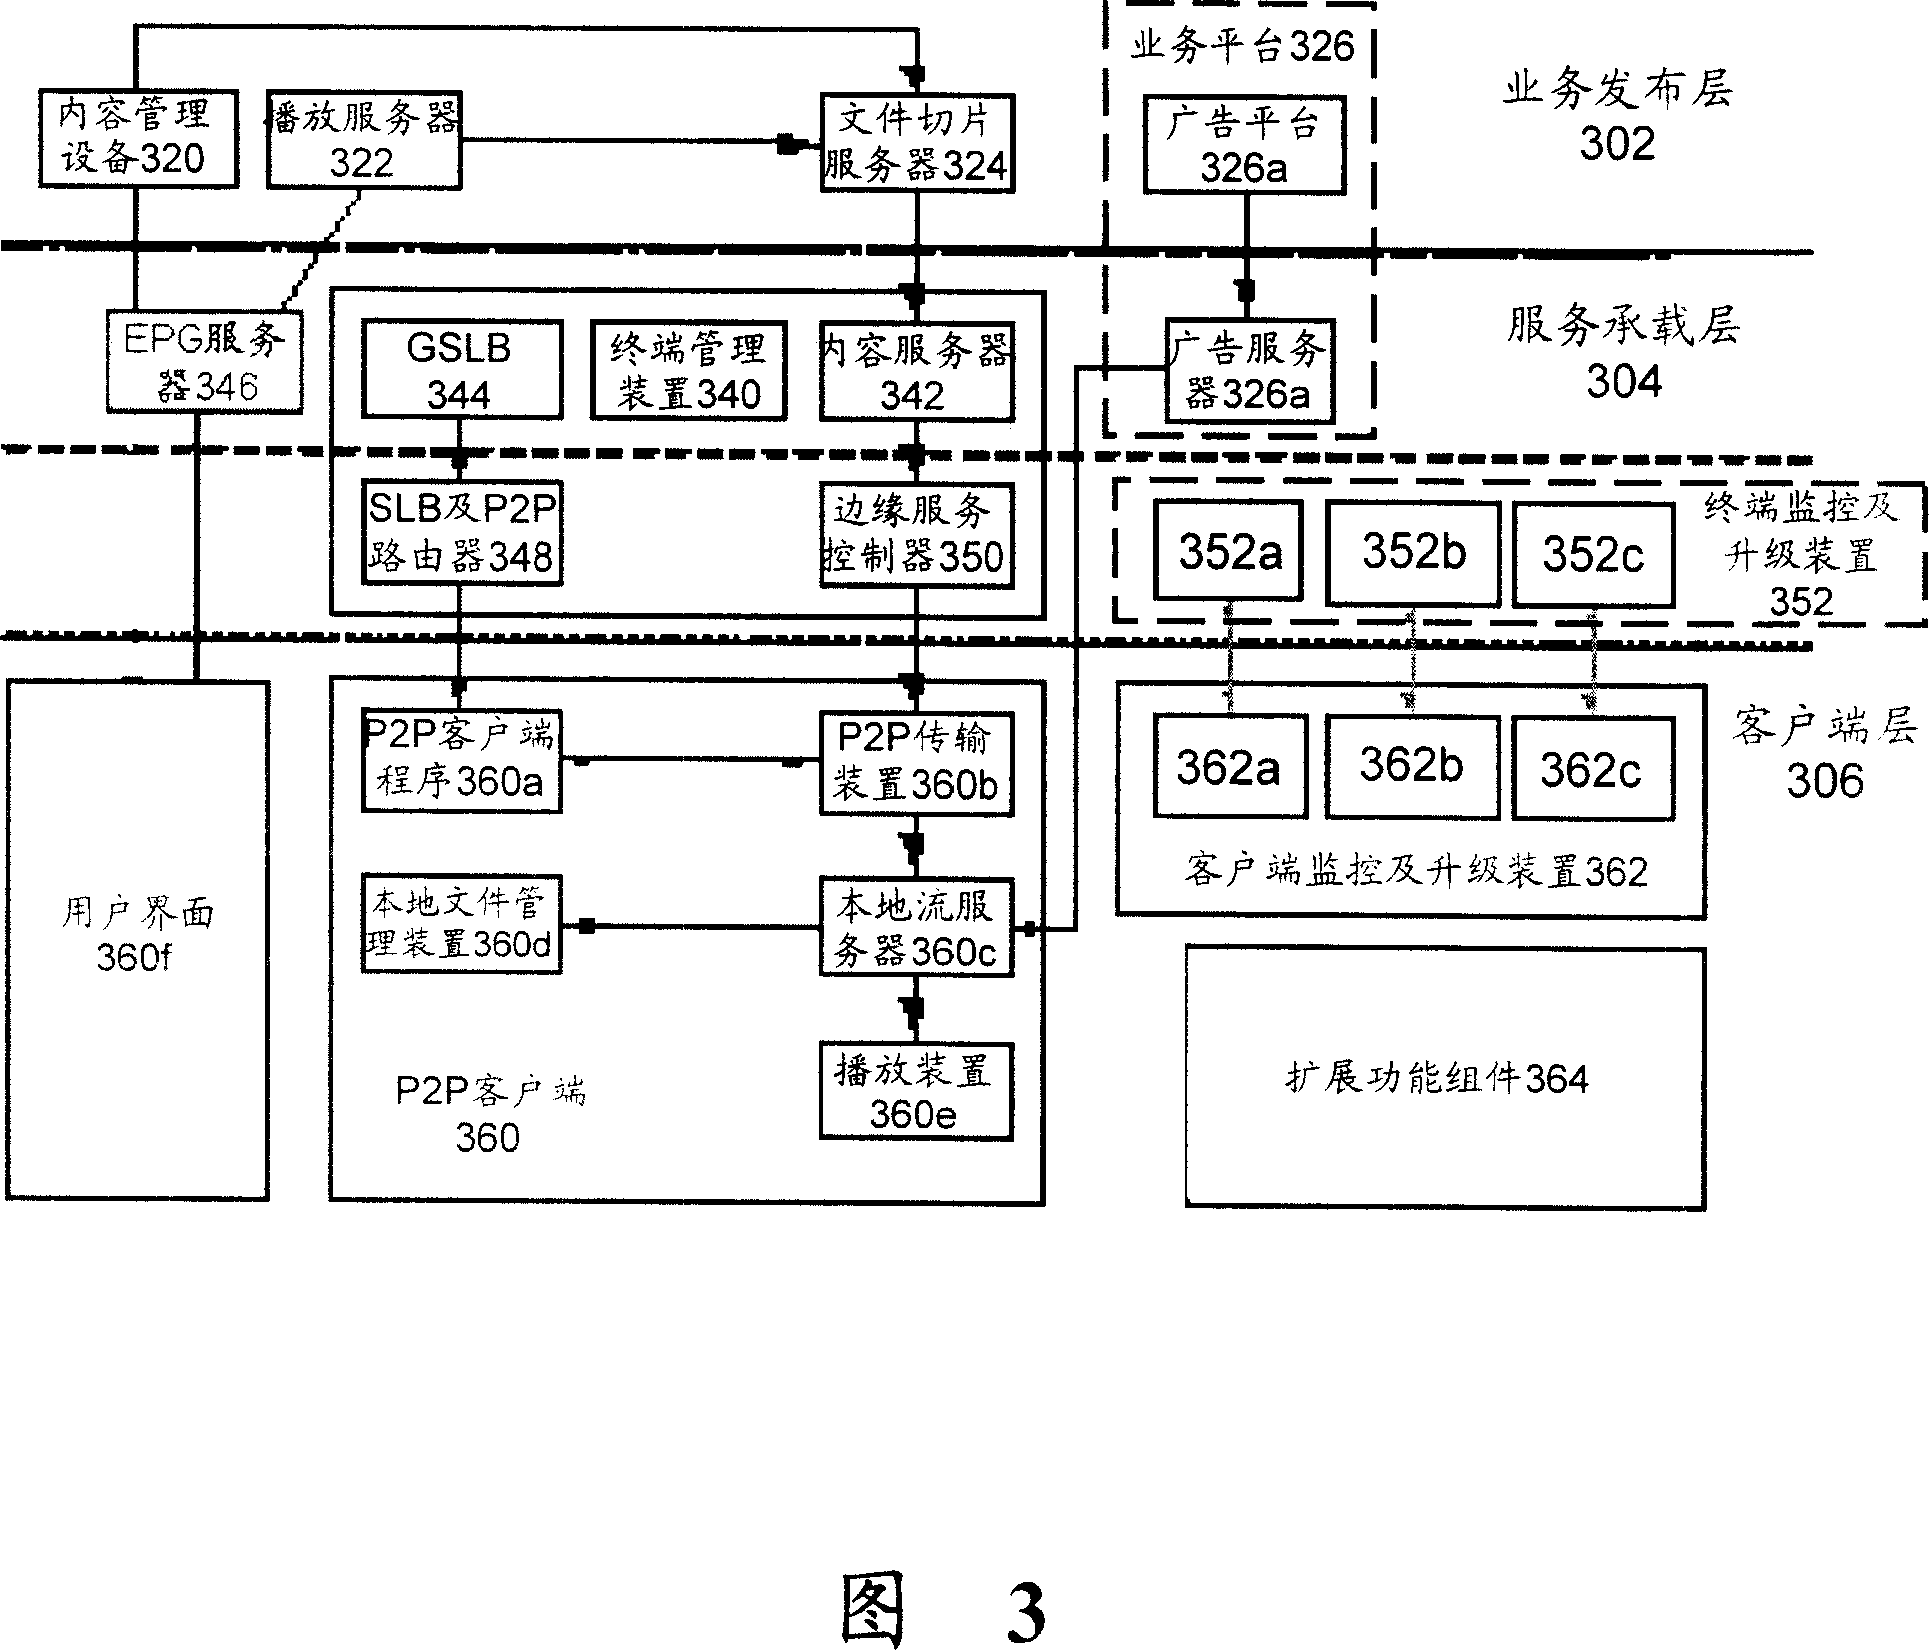 Routing system and method of content distribution network